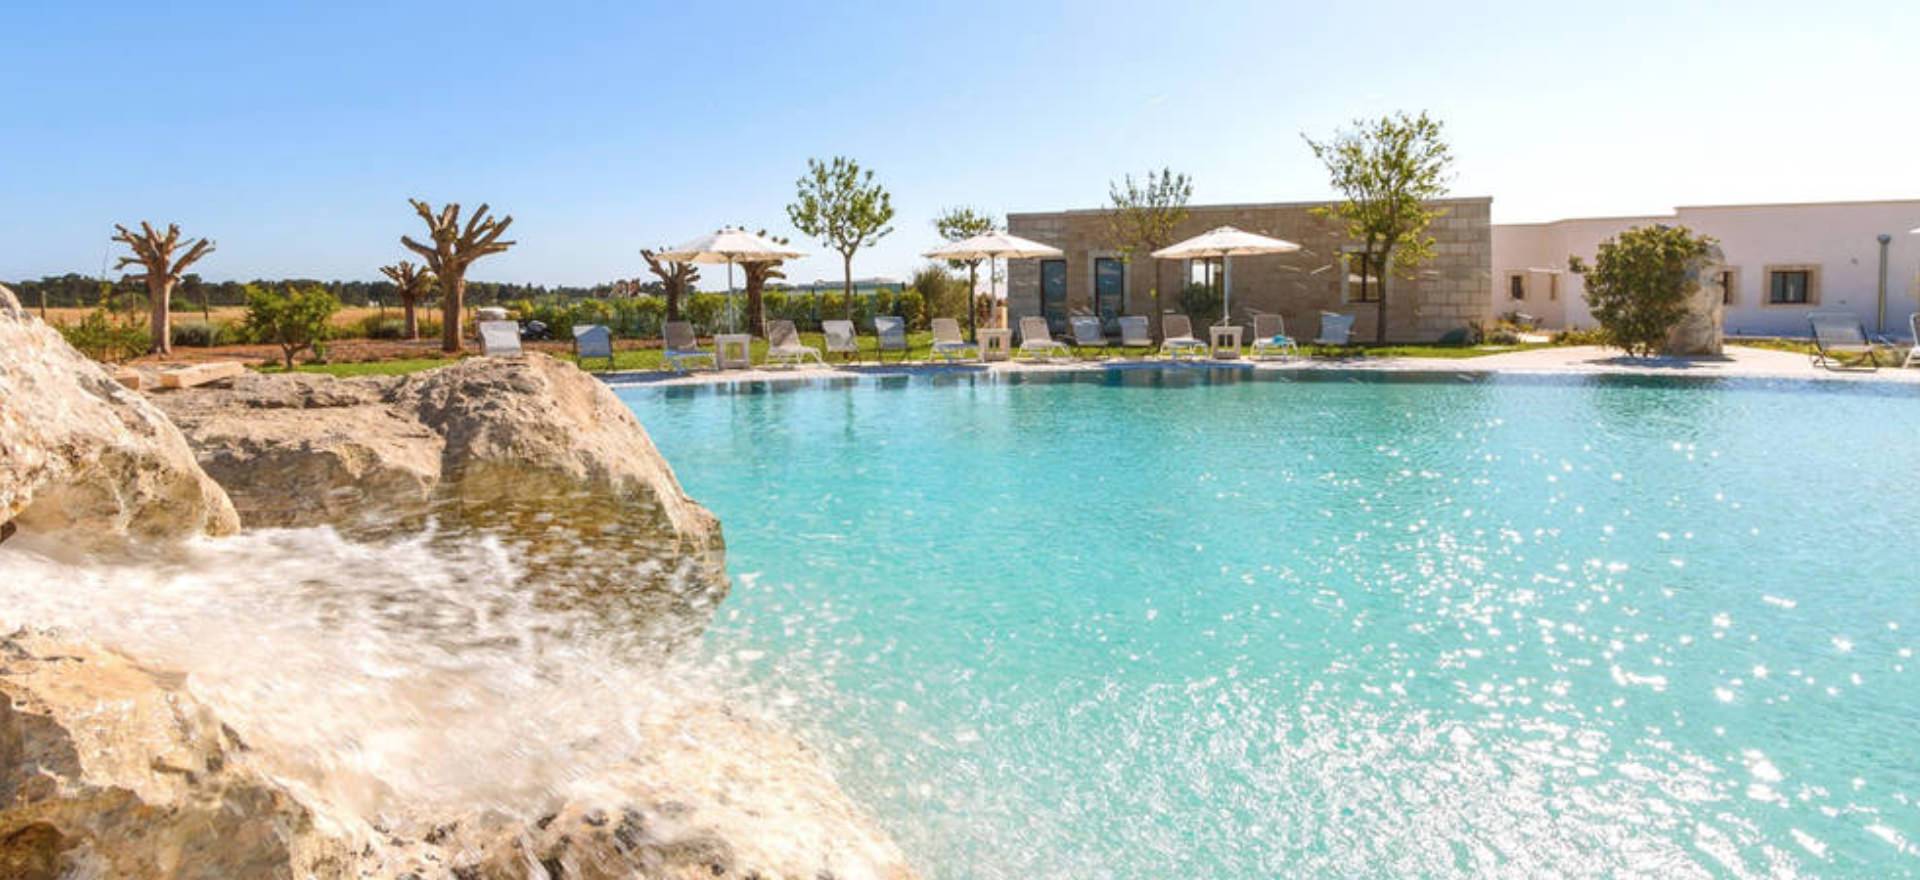 Agriturismo Puglia Luxury agriturismo at walking distance from the beach